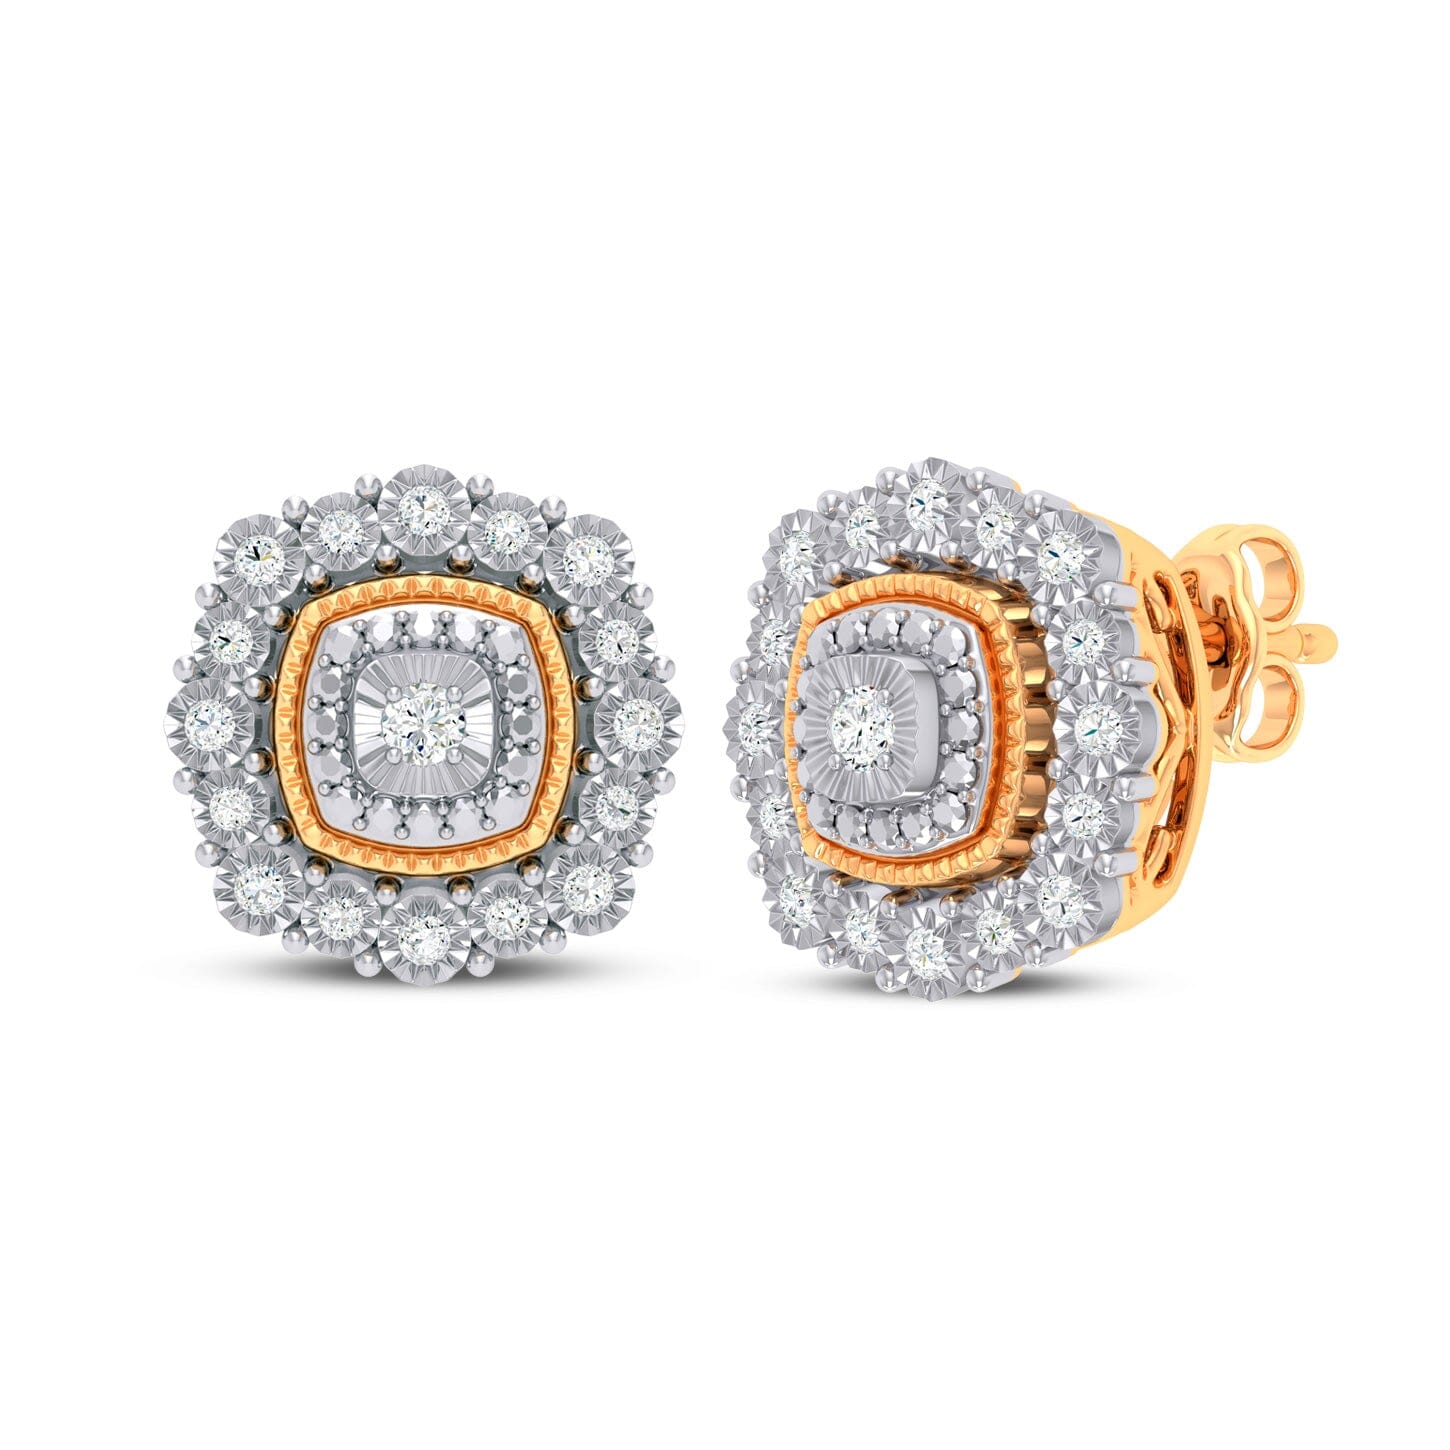 Meera Halo Square Look Stud Earrings with 0.15ct of Laboratory Grown Diamonds in 9ct Yellow Gold Earrings Bevilles 